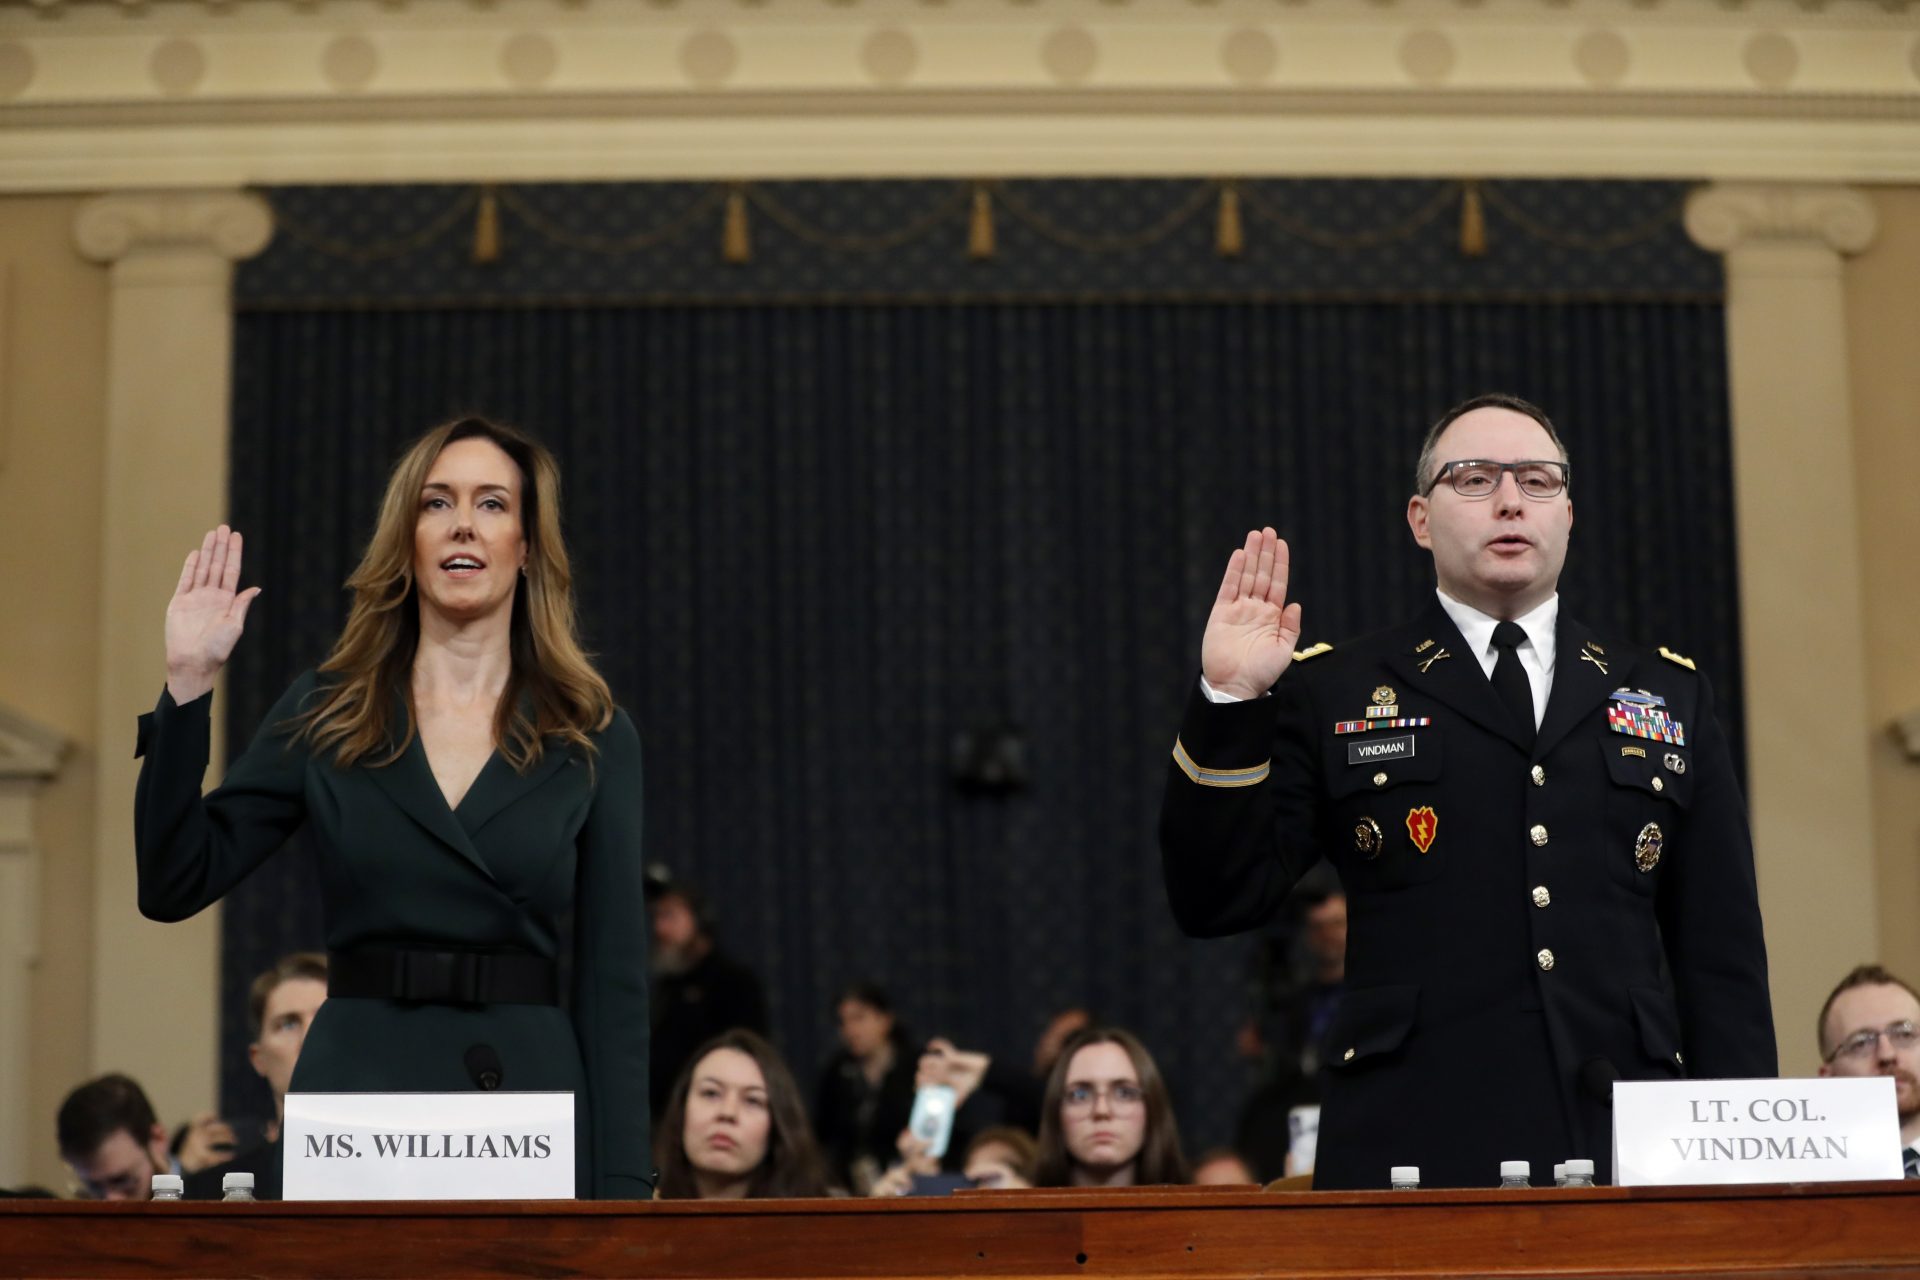 Jennifer Williams, an aide to Vice President Mike Pence, left, and National Security Council aide Lt. Col. Alexander Vindman, are sworn in to testify before the House Intelligence Committee on Capitol Hill in Washington, Tuesday, Nov. 19, 2019, during a public impeachment hearing of President Donald Trump's efforts to tie U.S. aid for Ukraine to investigations of his political opponents.